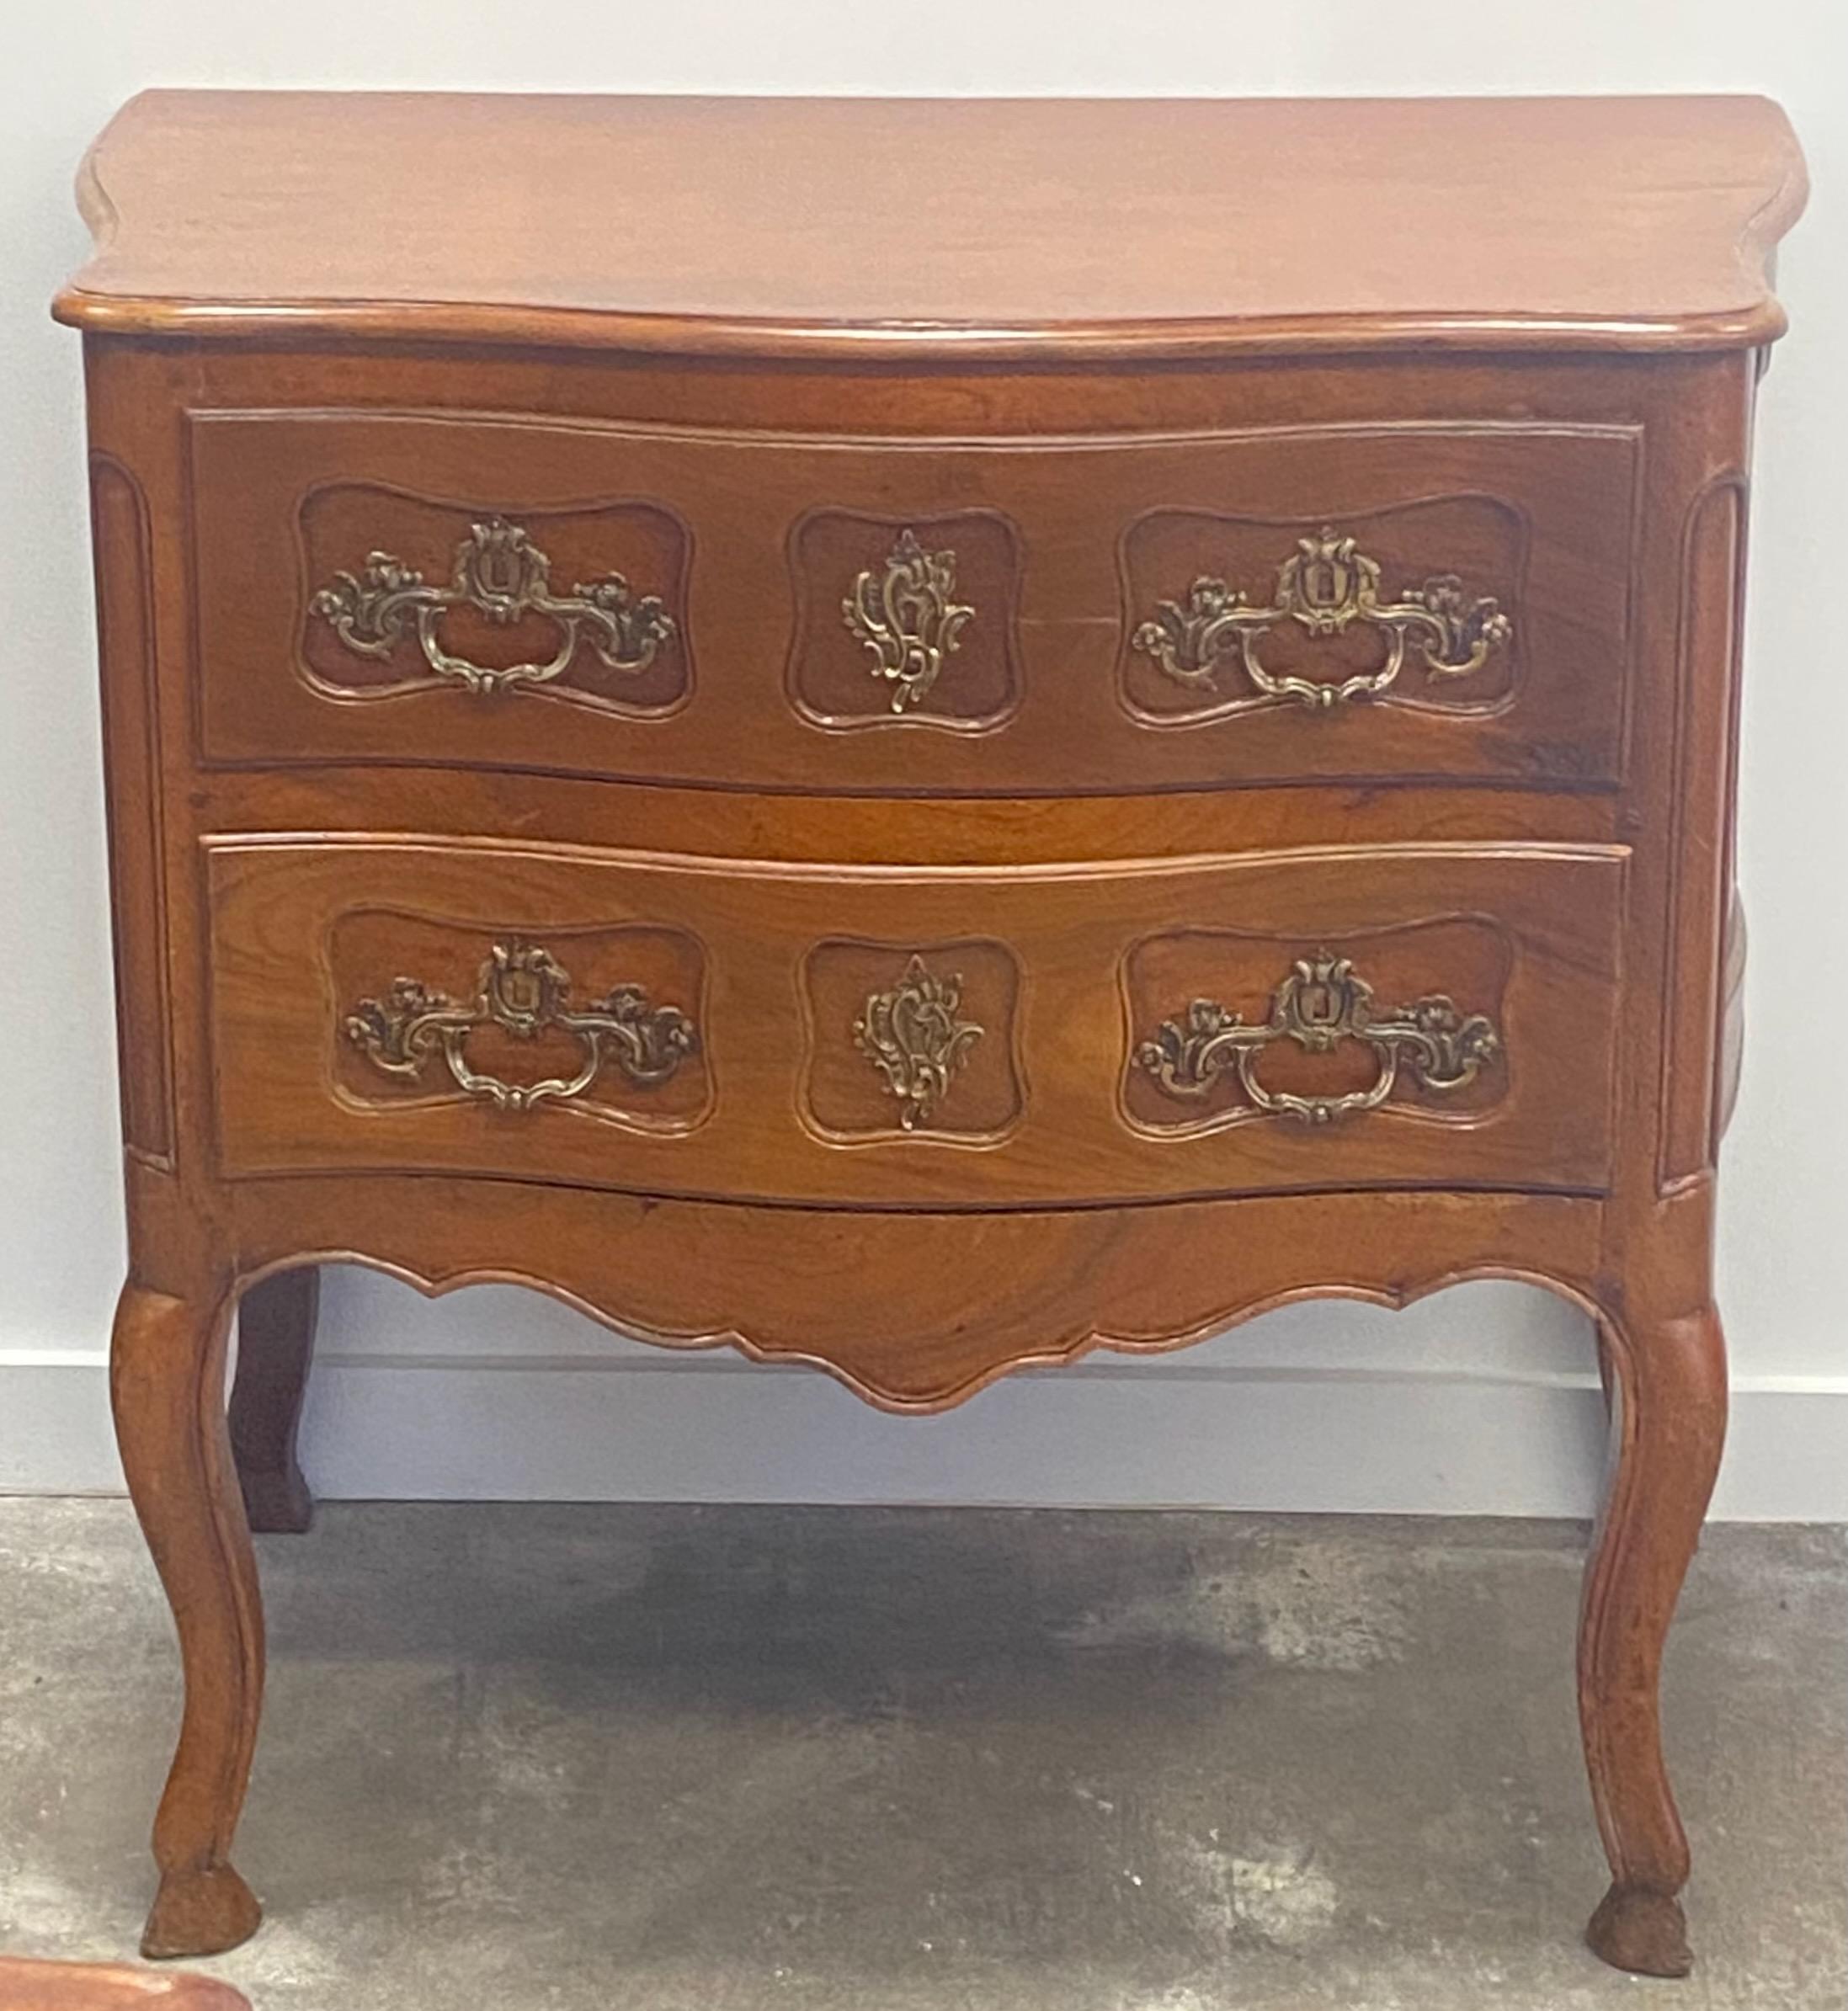 An elegant Louis XV period carved walnut two drawer commode with original brass hardware.
An easy useable size that will work in many settings.
Refinished in the last quarter of the 20th century.
In excellent condition.
France, mid to late